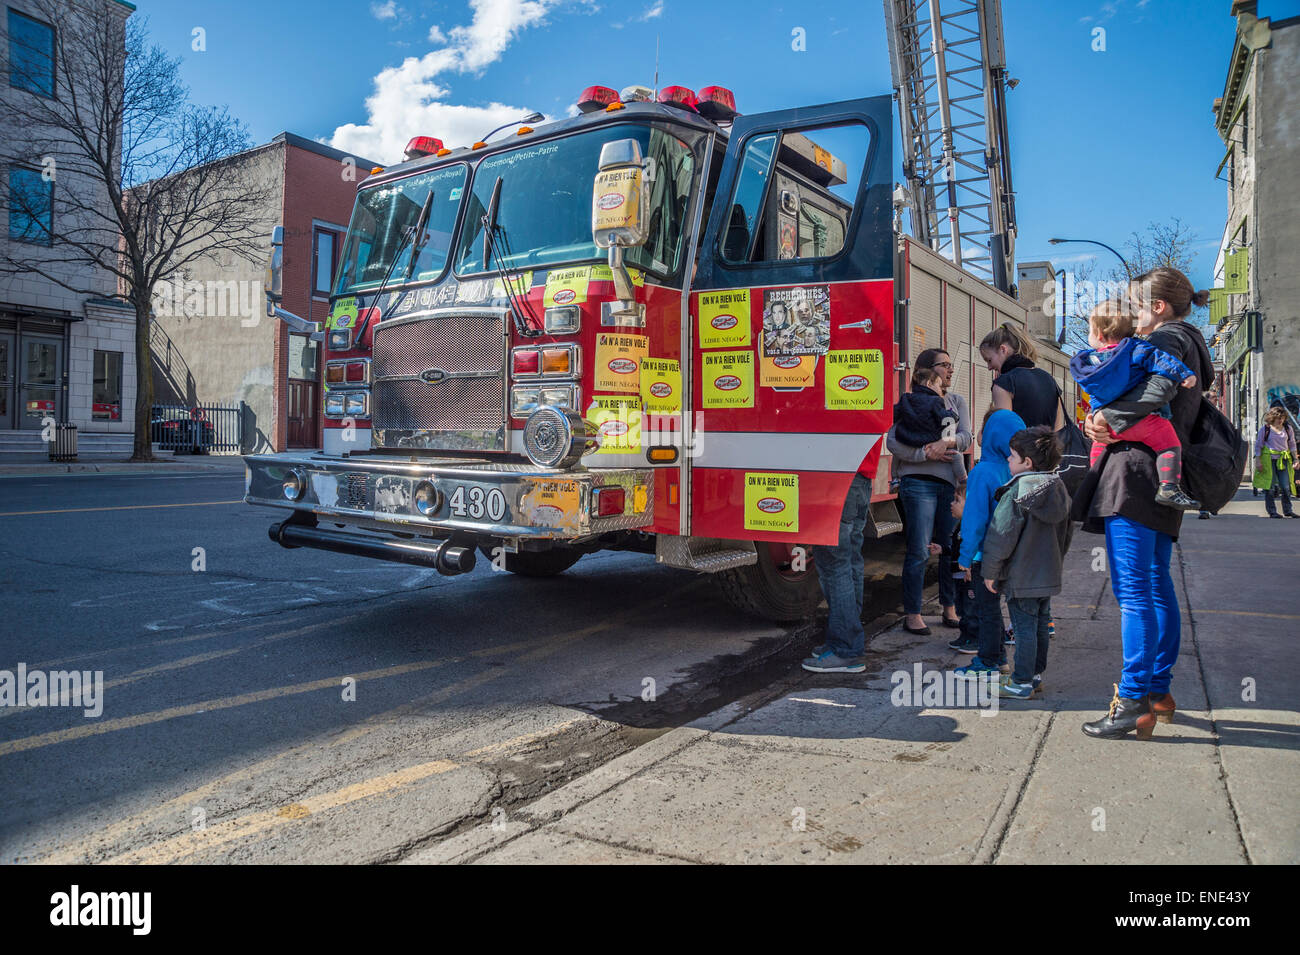 Montreal, May 2nd 2015. Fire department (SIM) Open house day at Plateau Mont-Royal fire station. Stock Photo